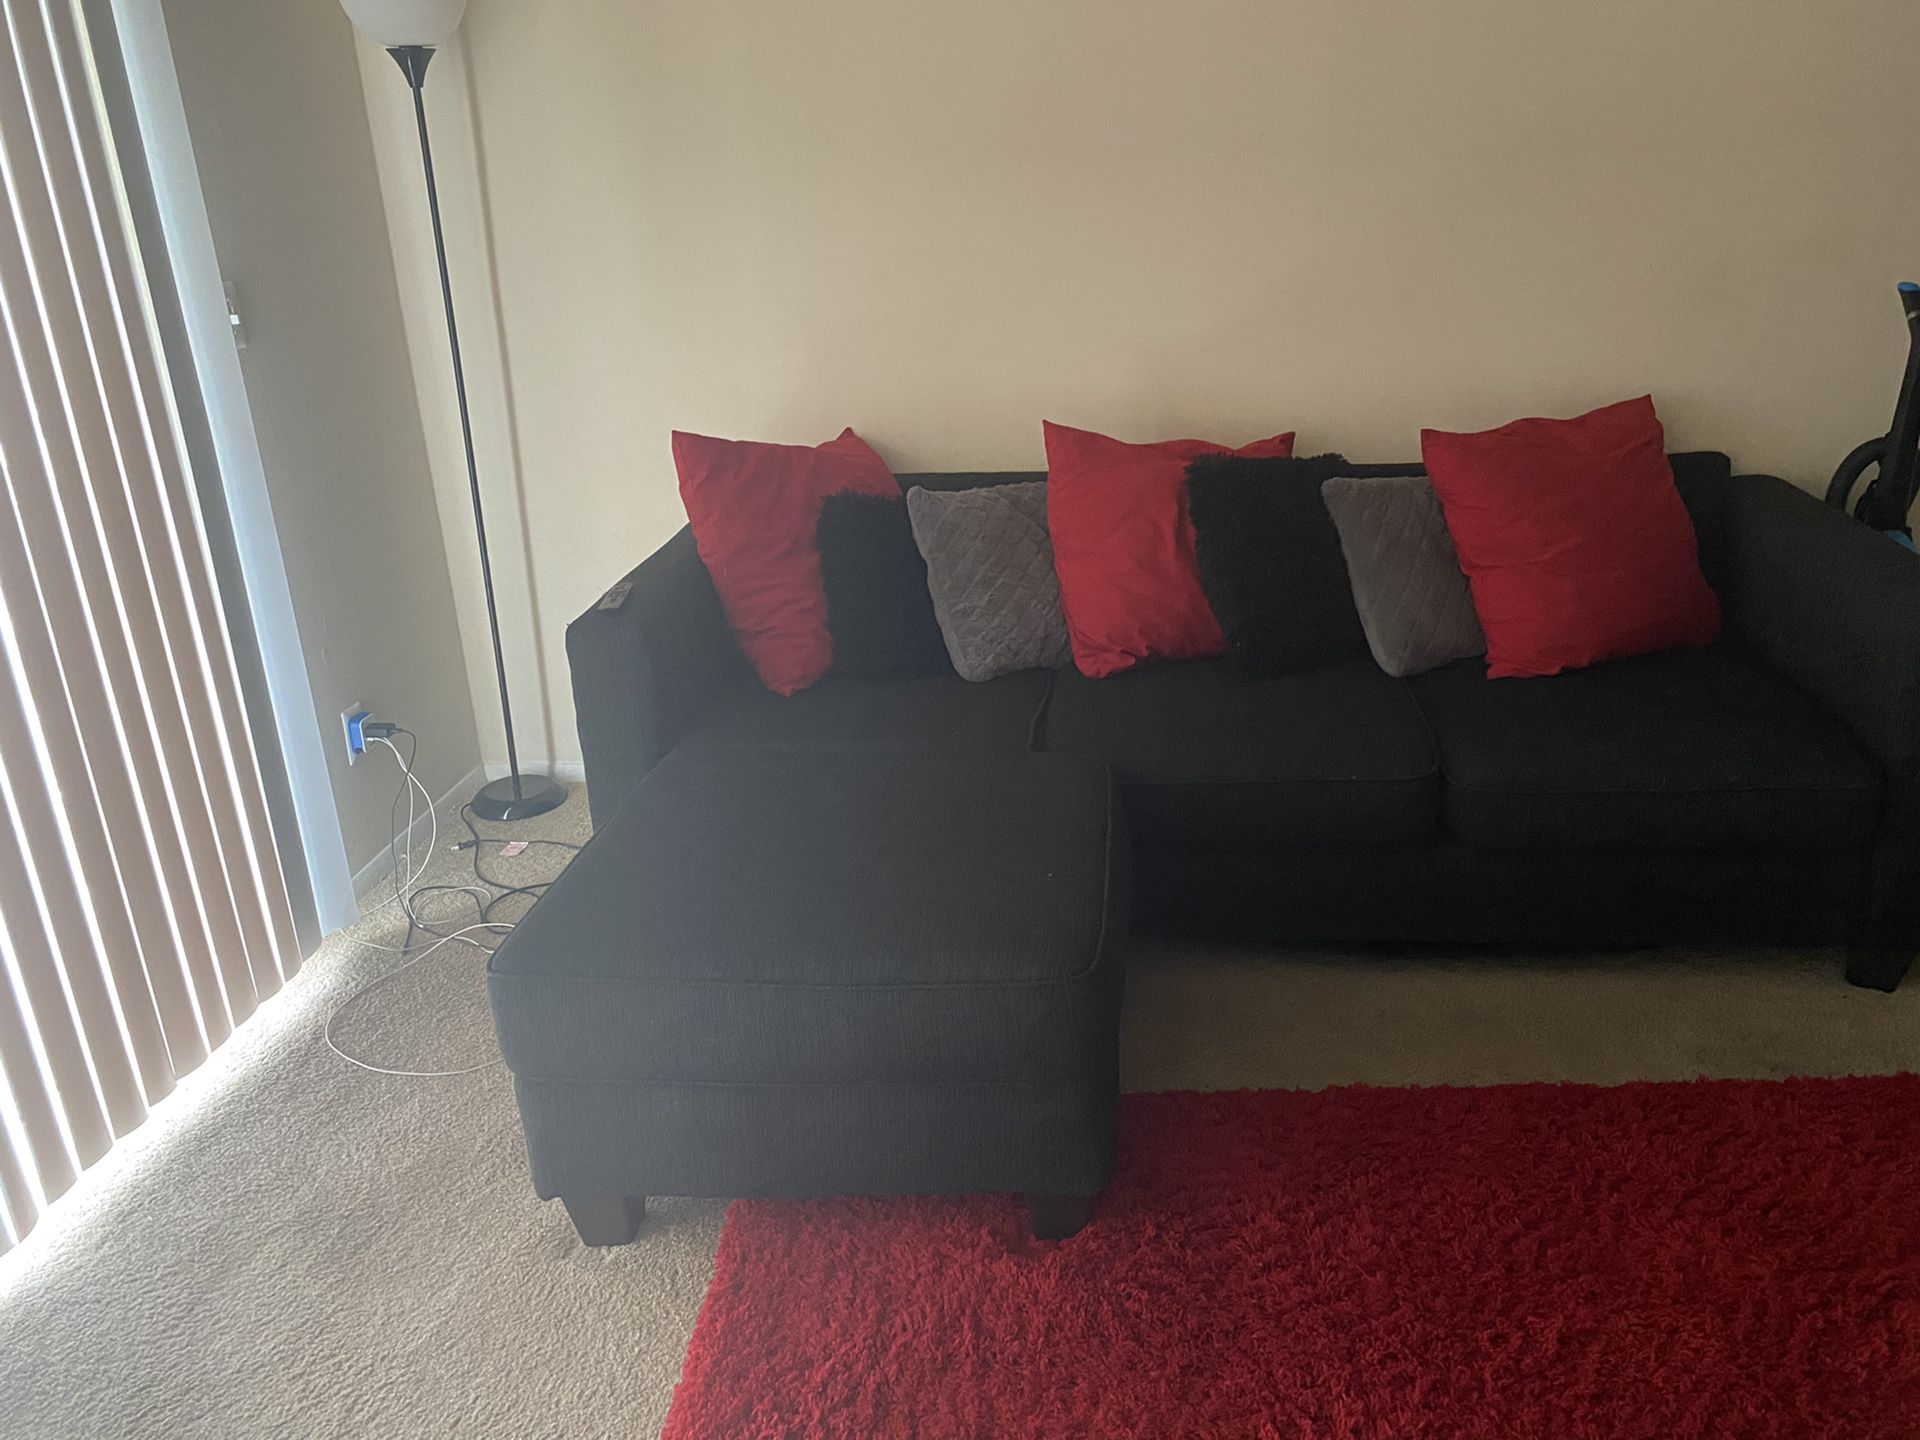 Black sectional couch